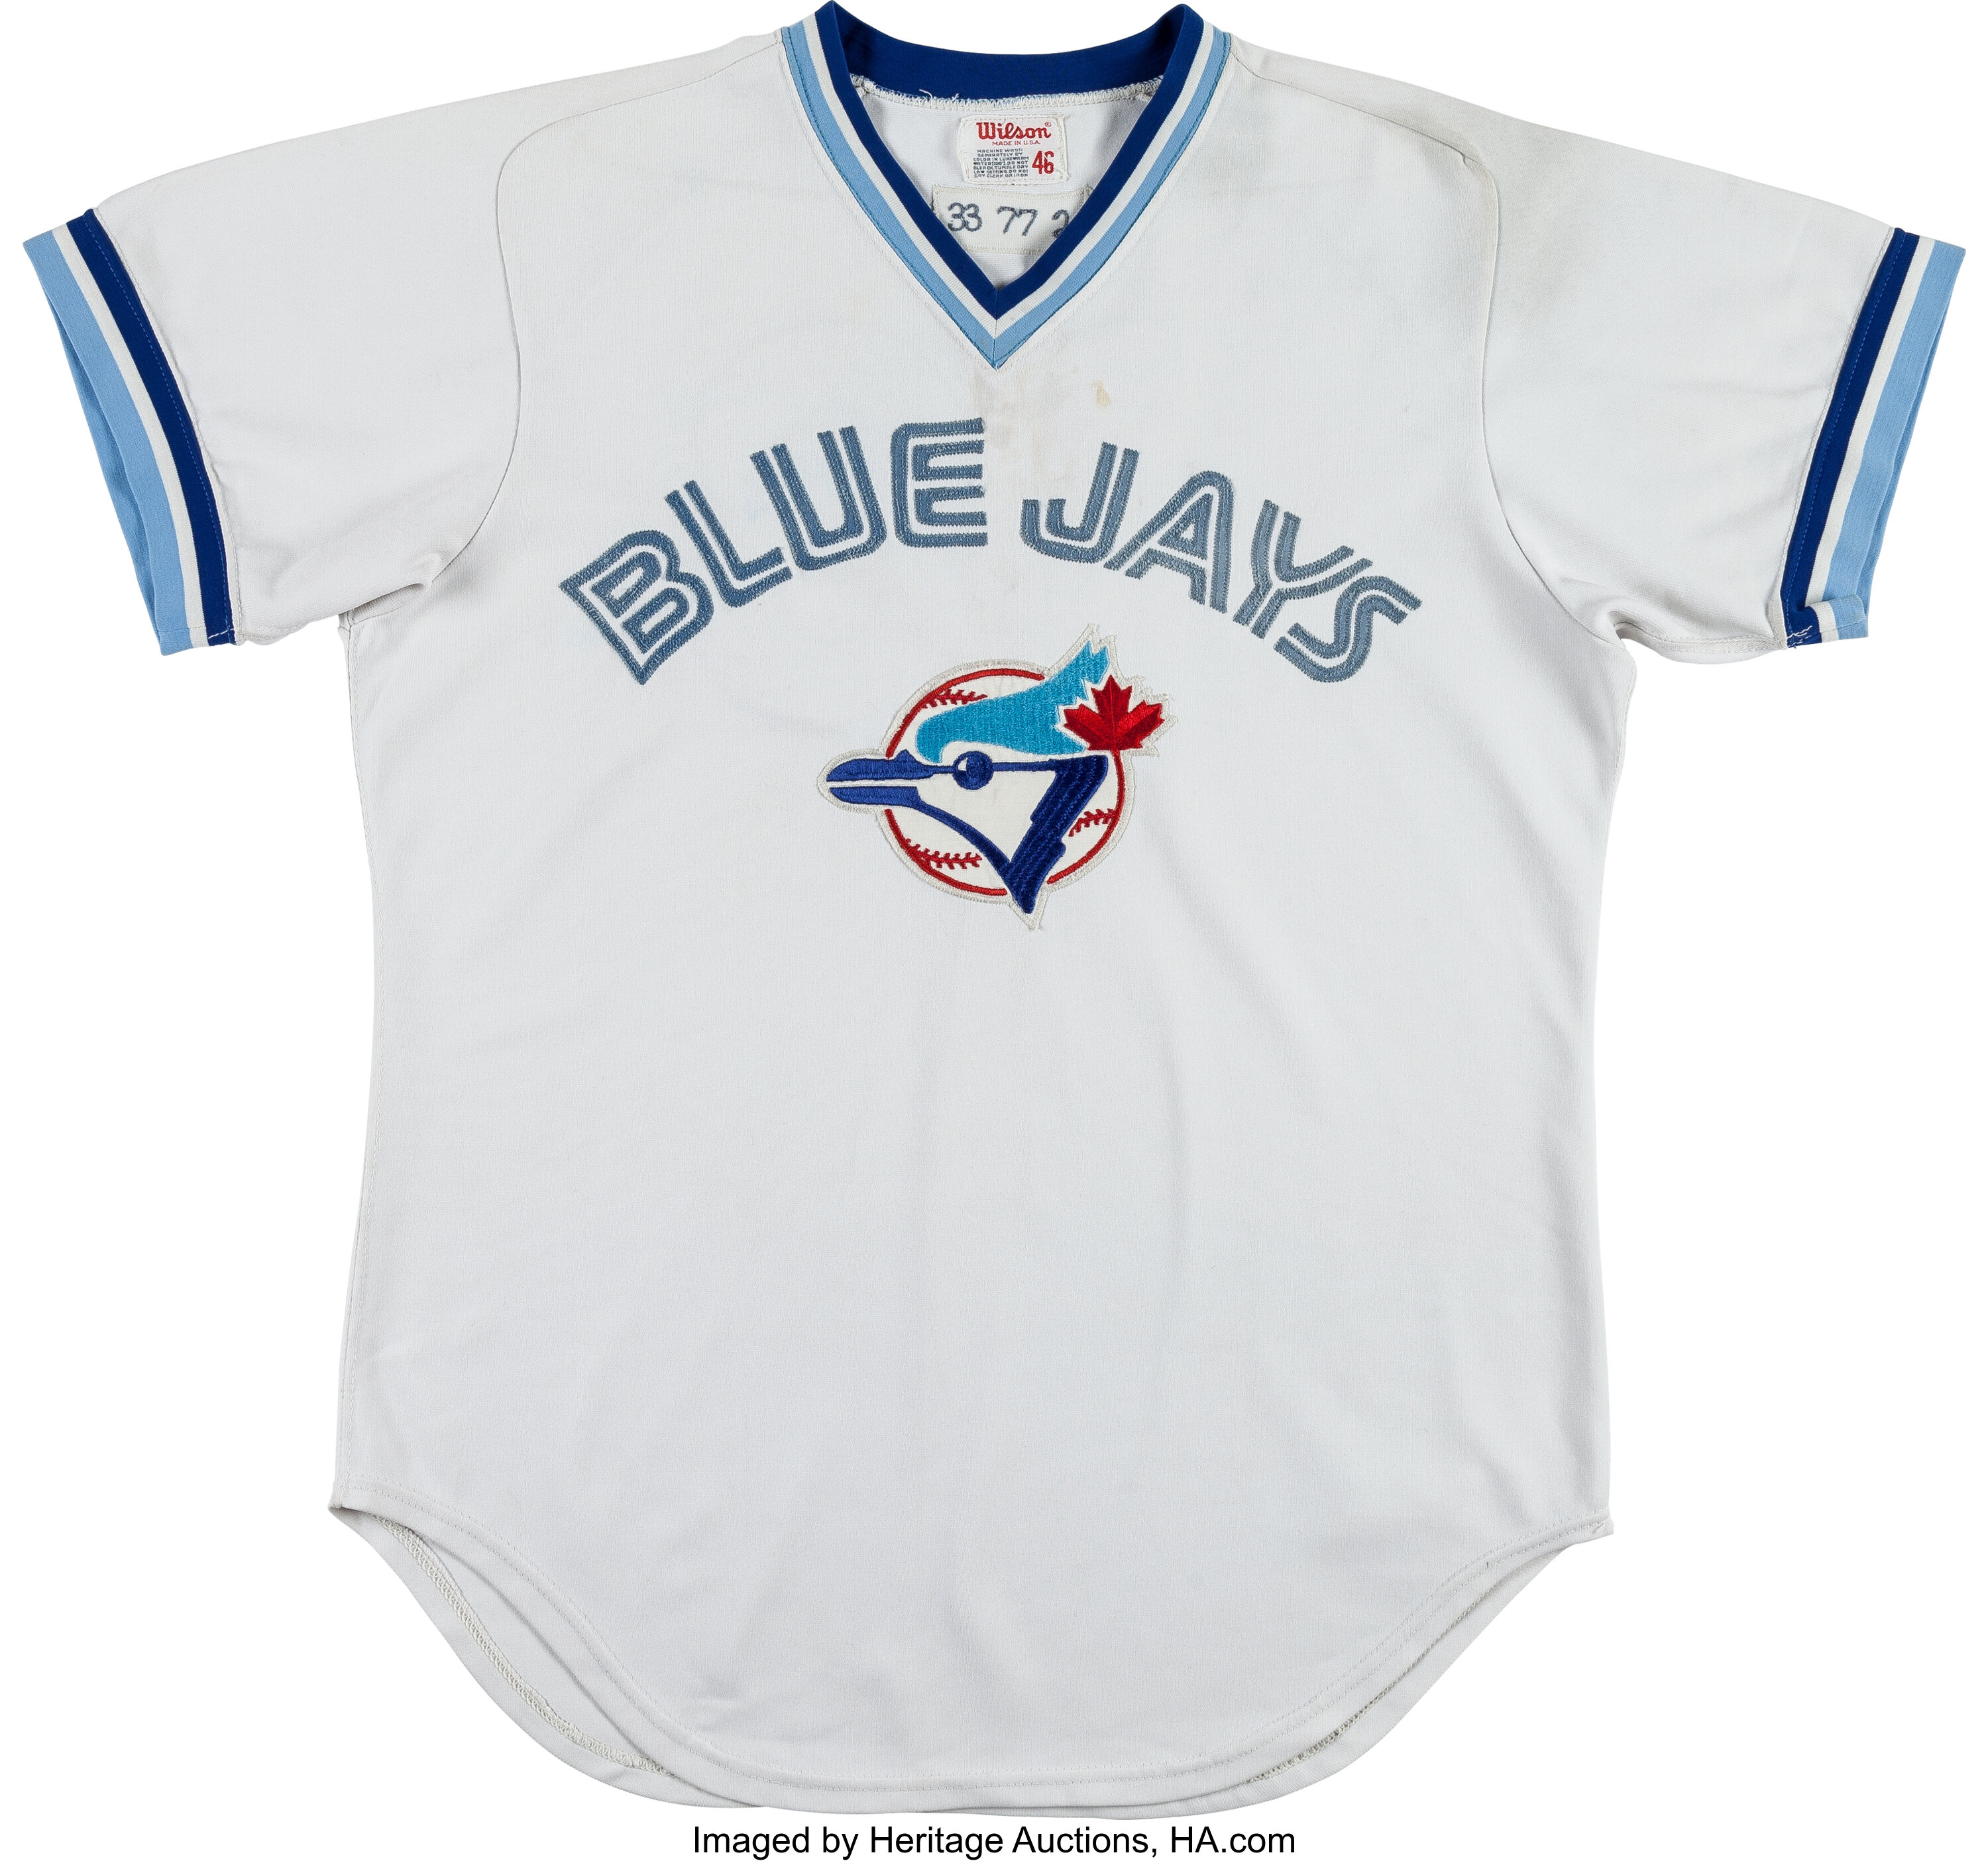 1977 Mike Willis Game Worn Toronto Blue Jays Jersey with Possible